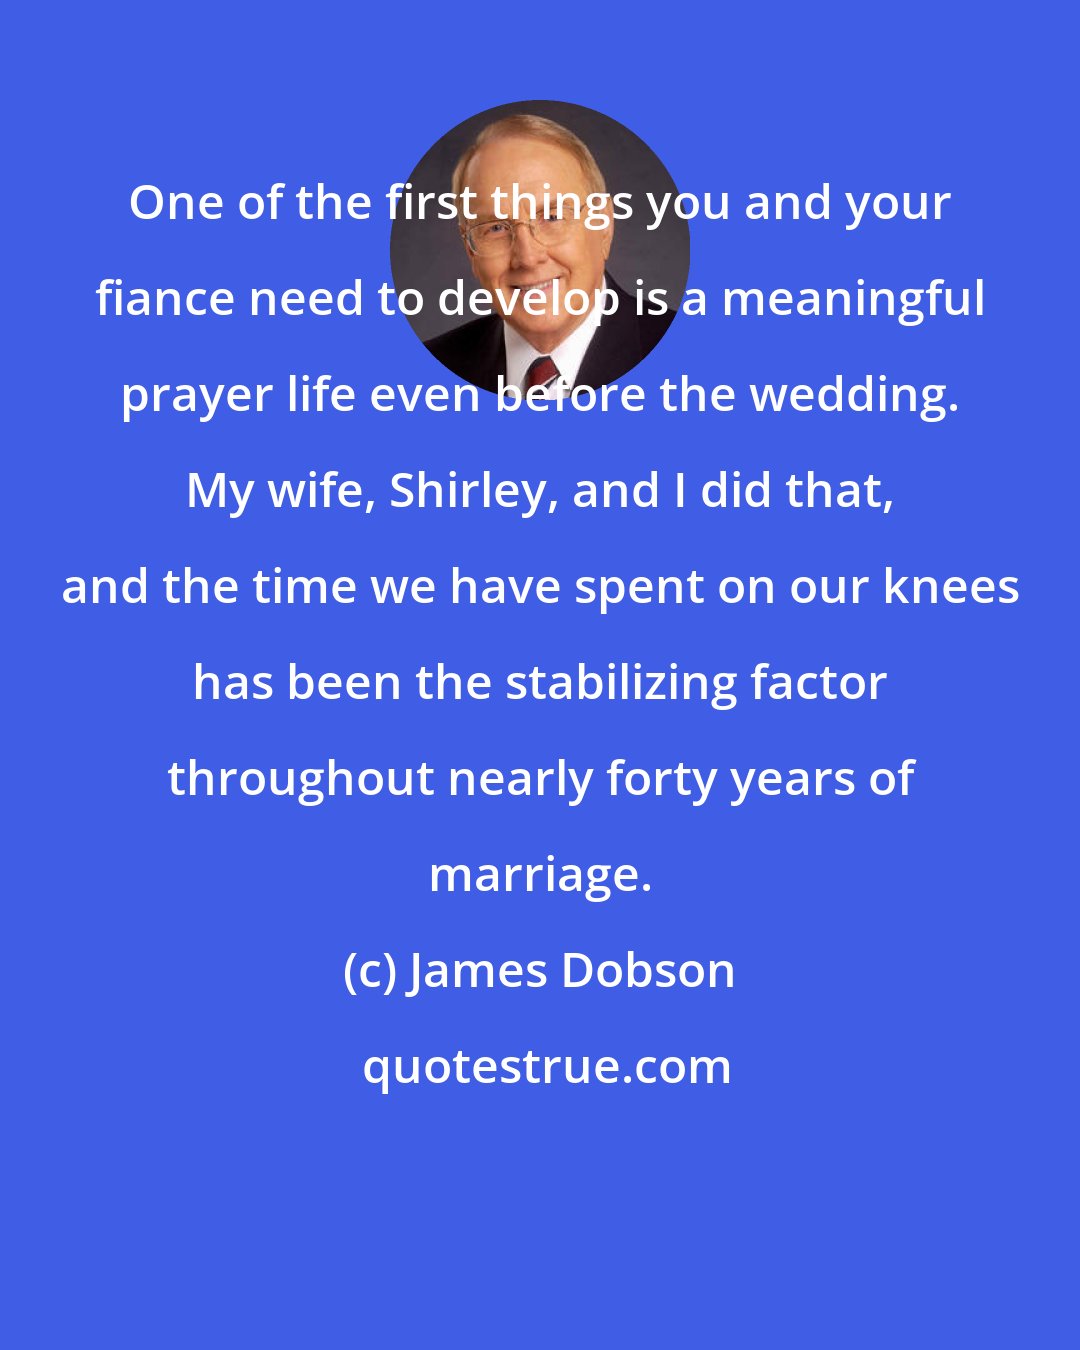 James Dobson: One of the first things you and your fiance need to develop is a meaningful prayer life even before the wedding. My wife, Shirley, and I did that, and the time we have spent on our knees has been the stabilizing factor throughout nearly forty years of marriage.